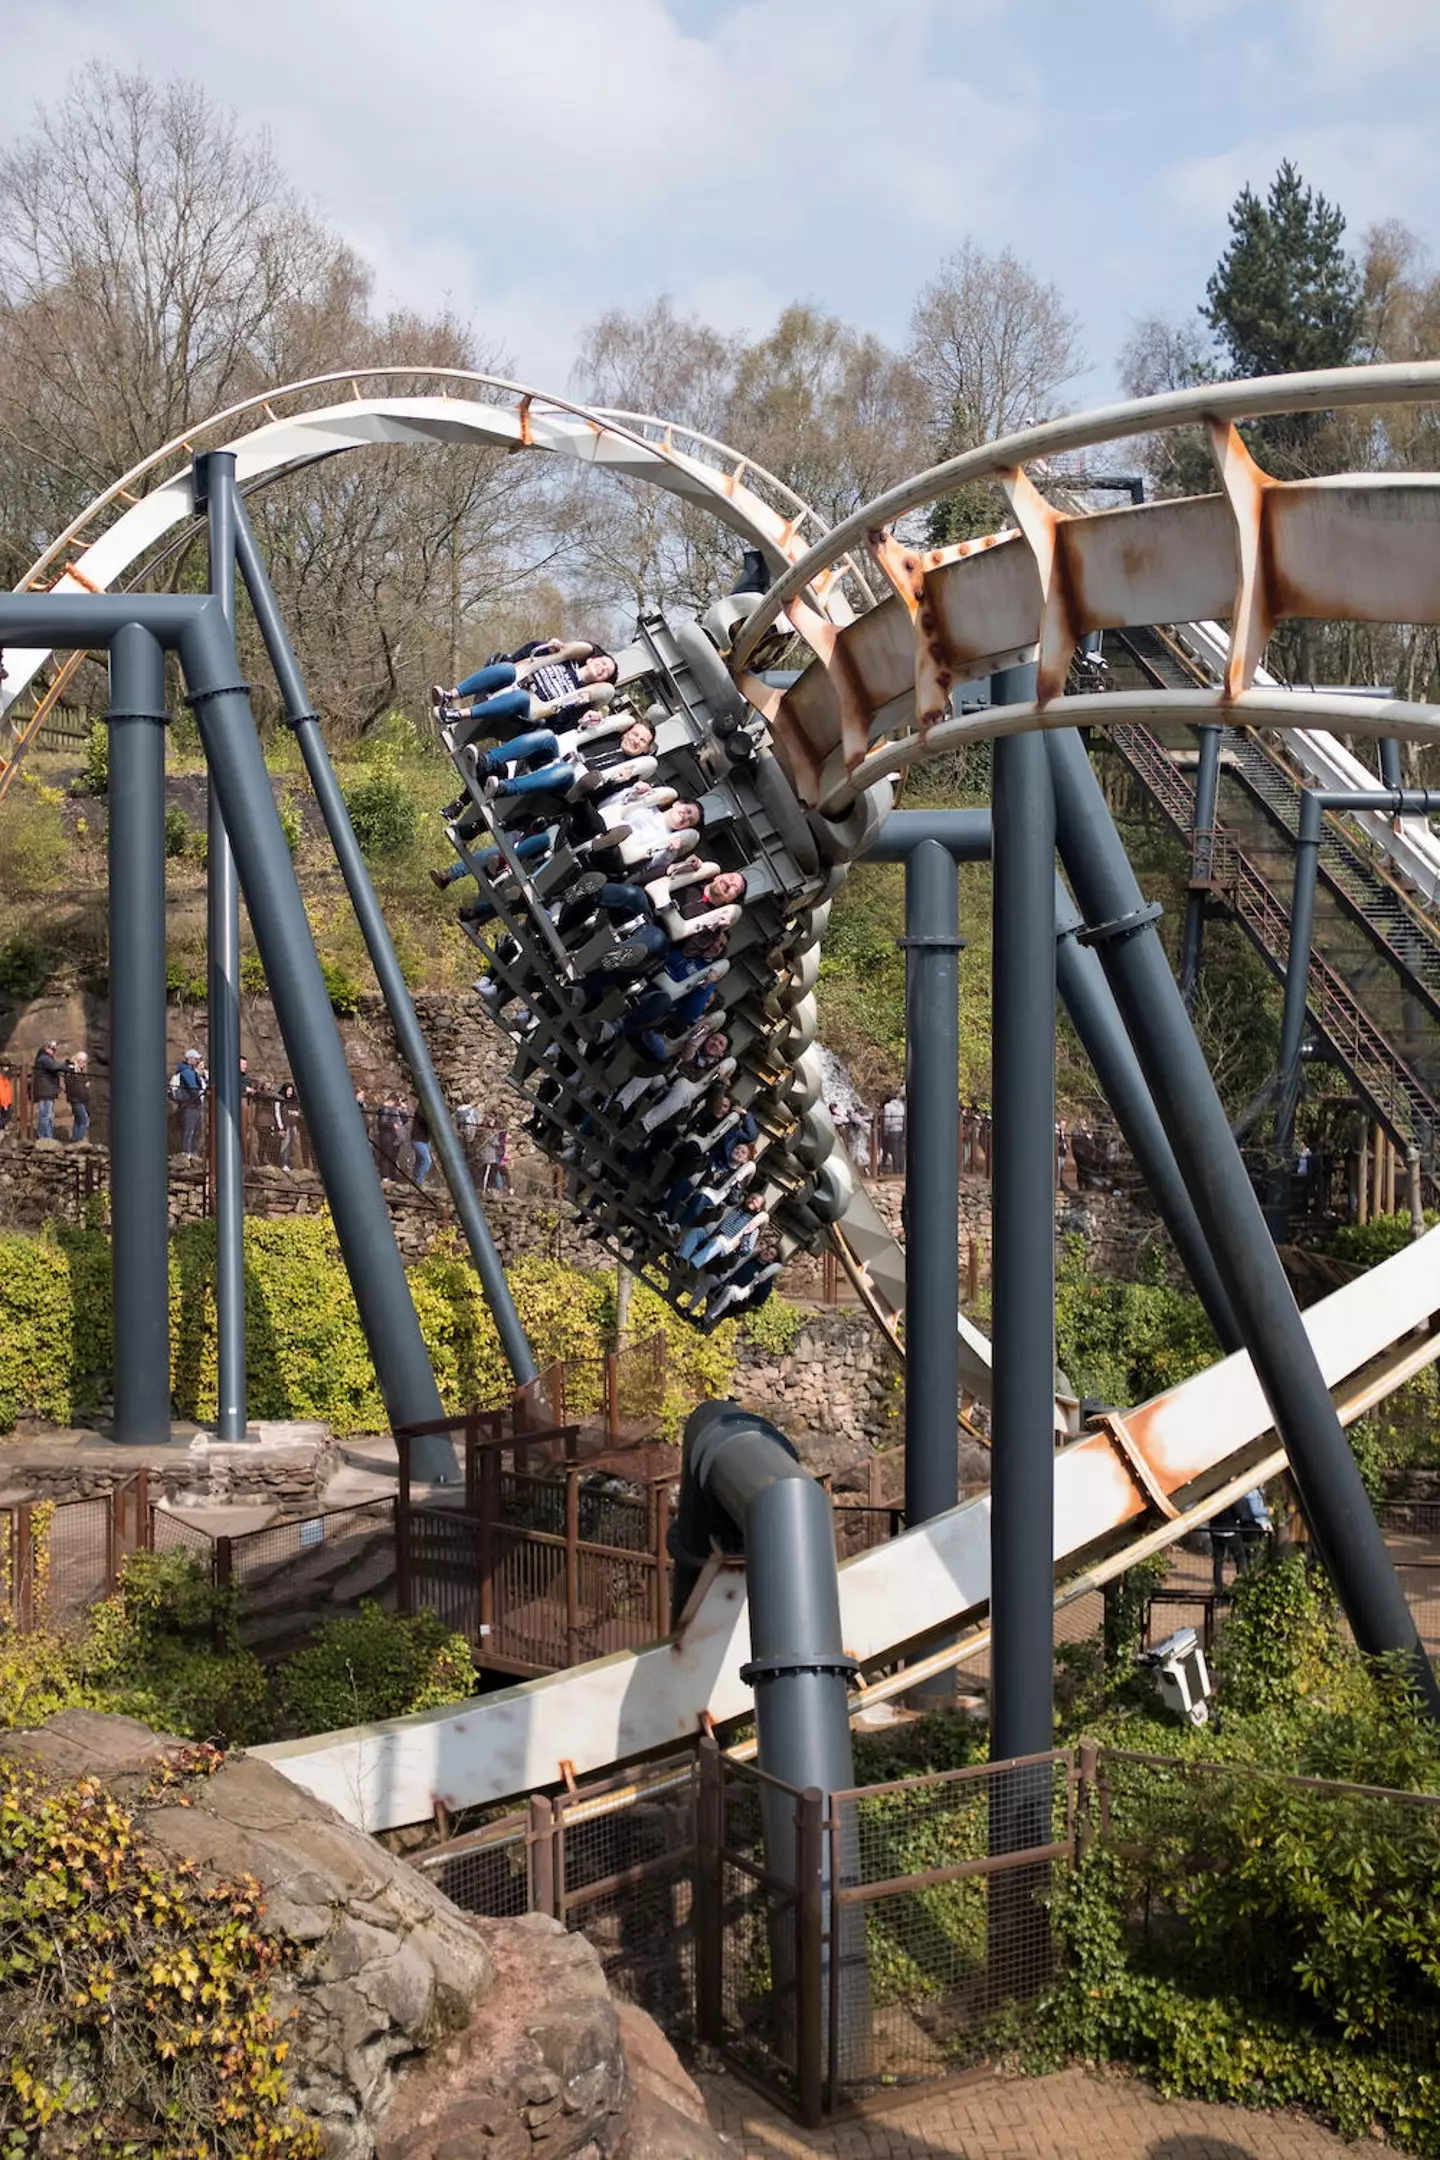 Nemesis is one of Alton Towers' most popular rides.